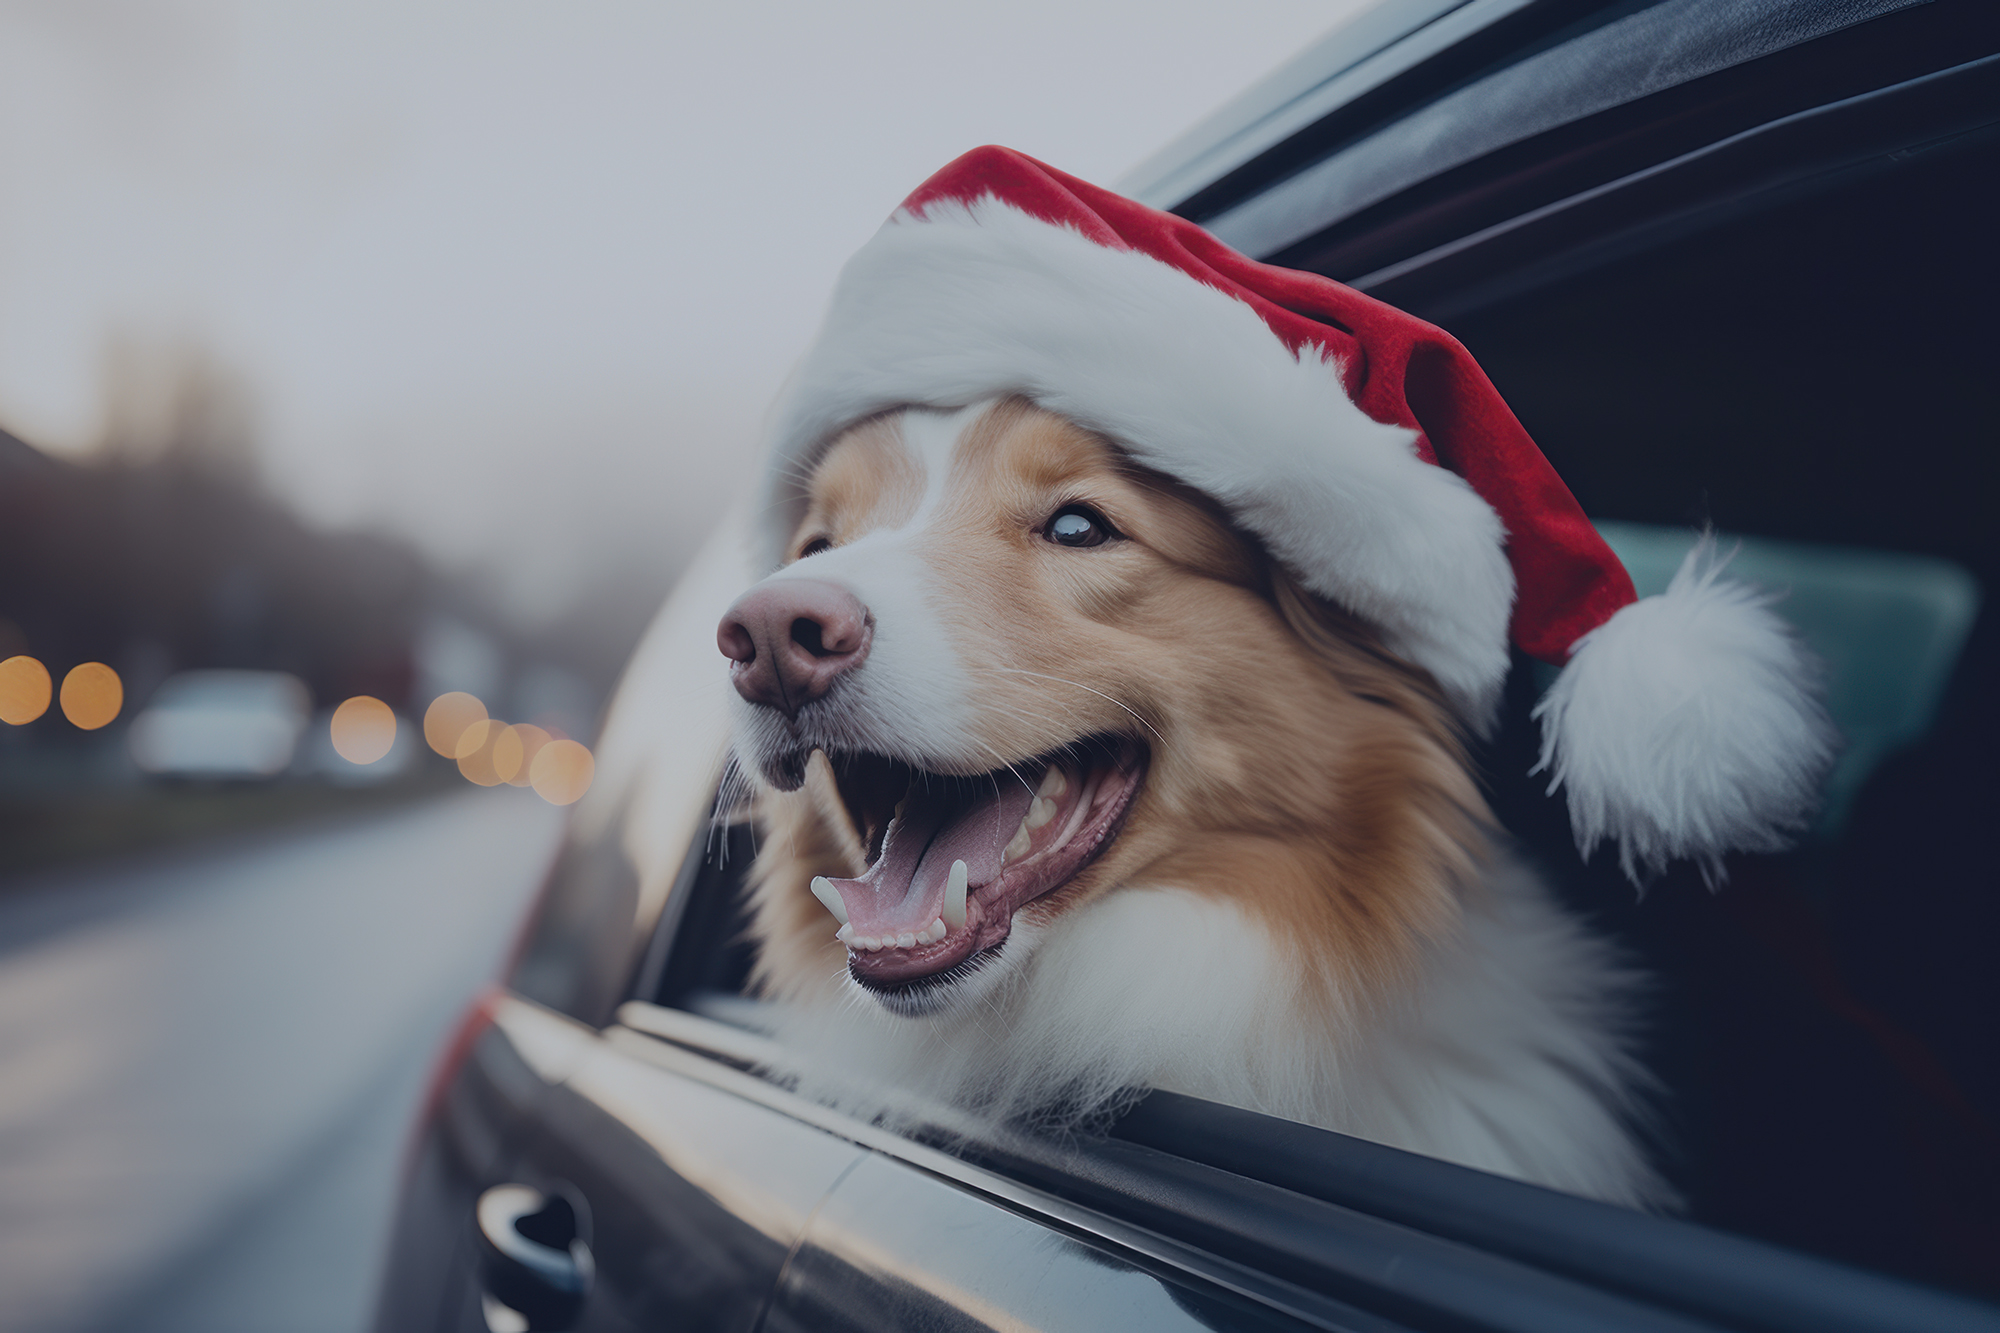 Why Auto Accidents Increase During the Holidays